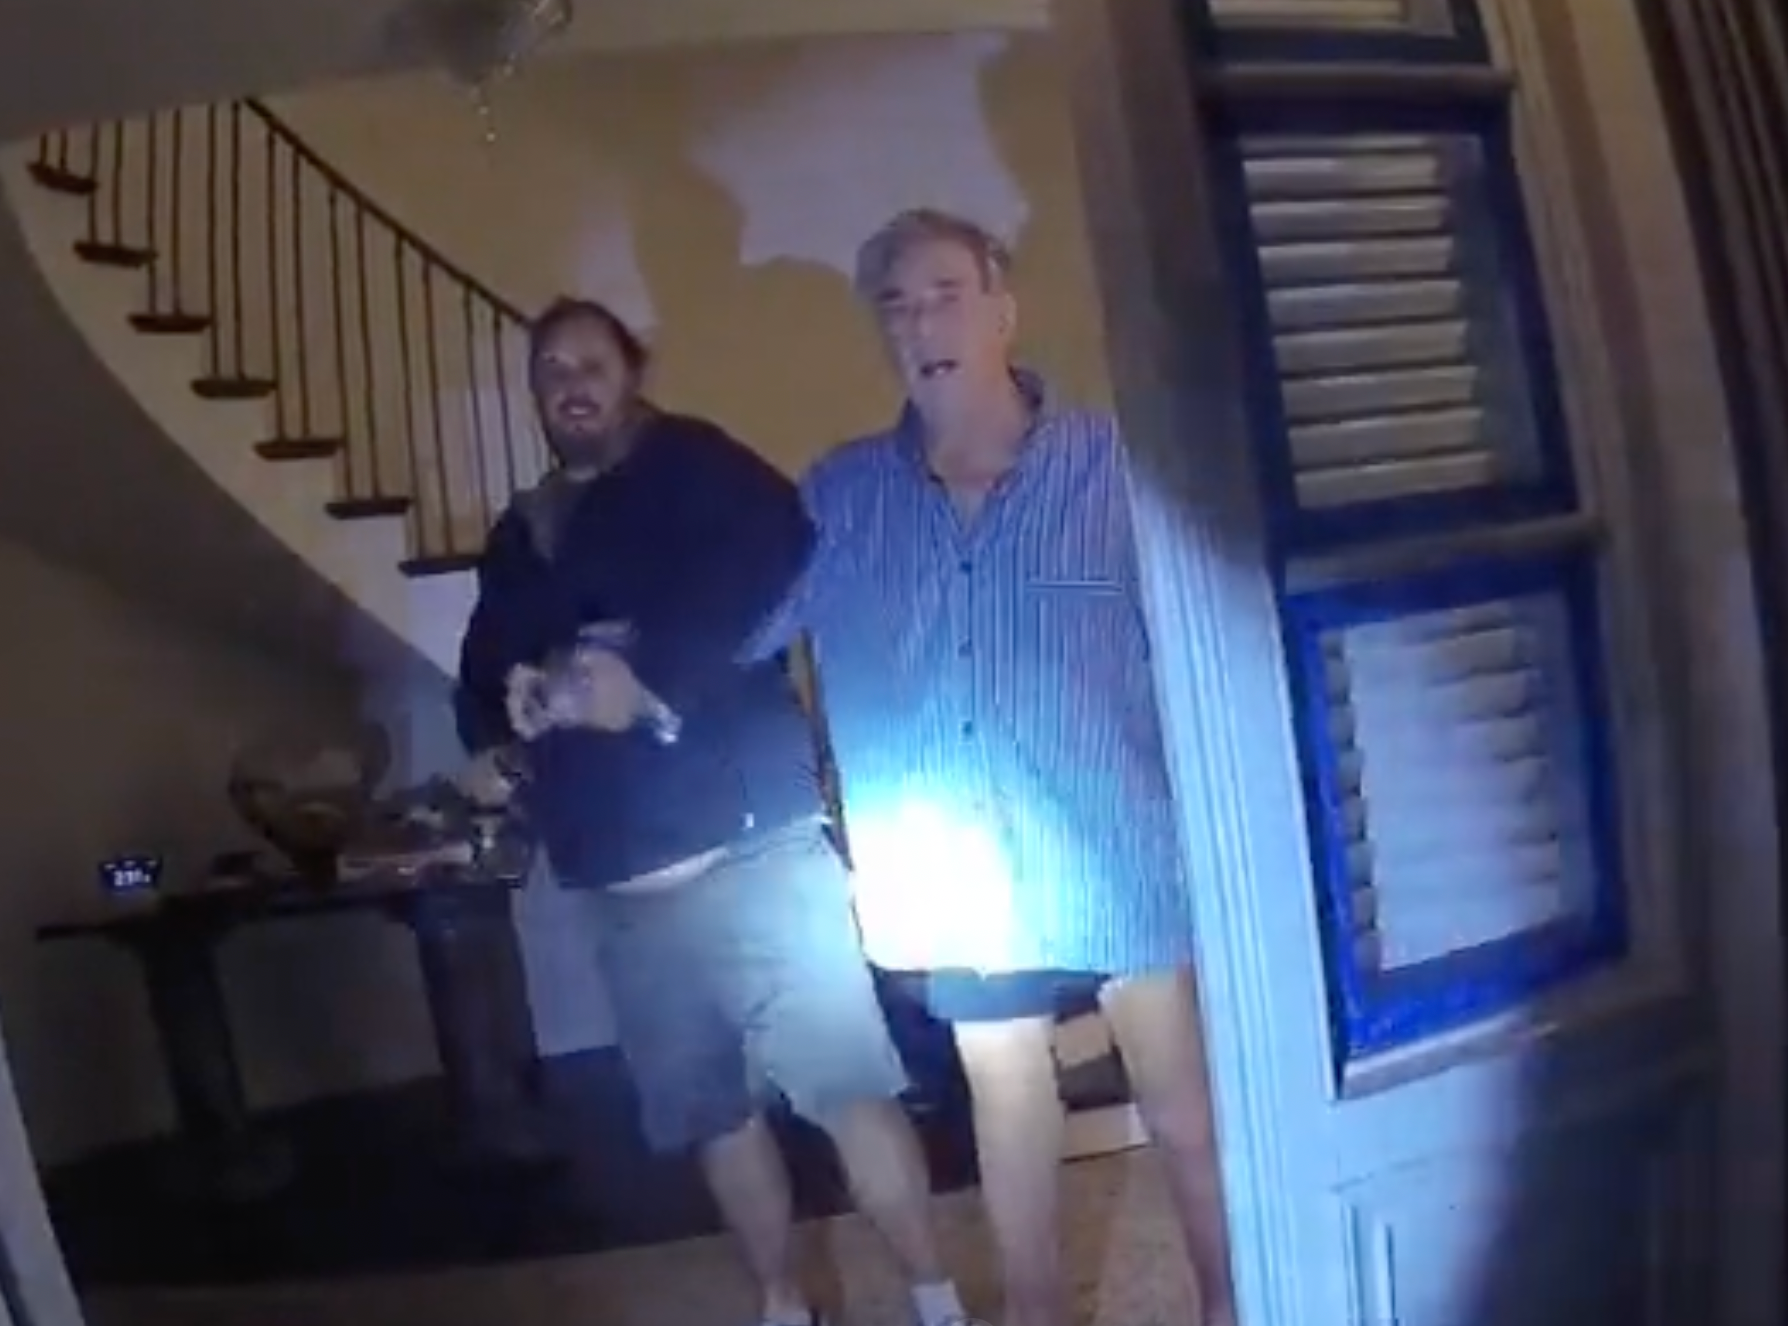 Police bodycam footage showing Paul Pelosi and an intruder, identified as David DePape, has been released by a California court